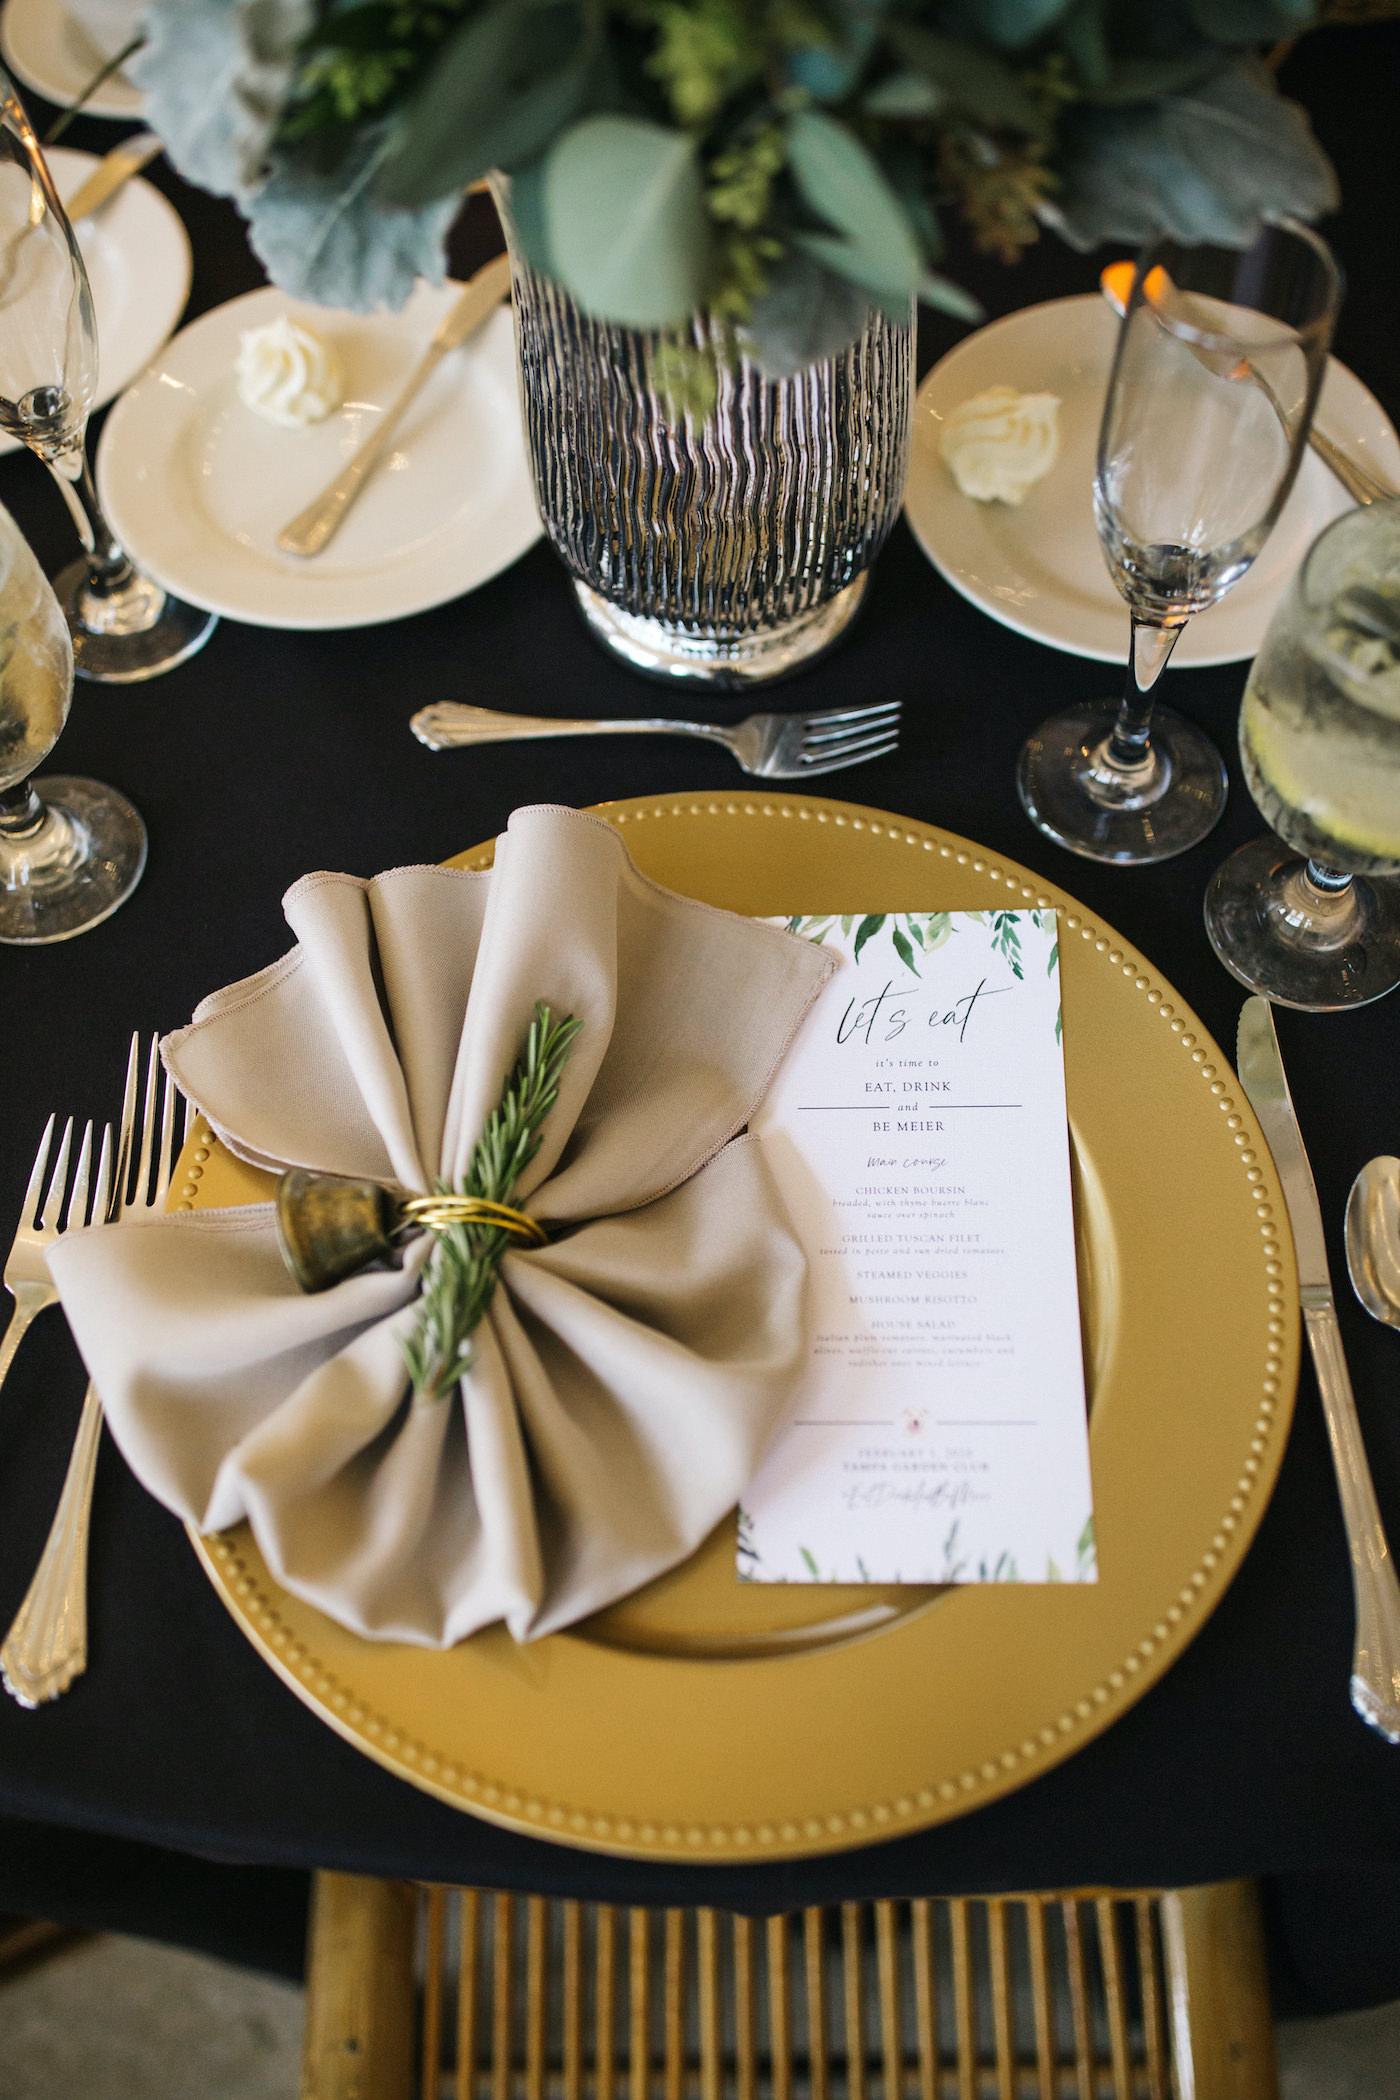 Black and White and Gold Wedding Place Setting with Black Table Linen and Gold Charger Plate and Taupe Napkin Fan accented with Fresh Rosemary Herb Sprig and Wedding Menu Card | Winsor Event Studio